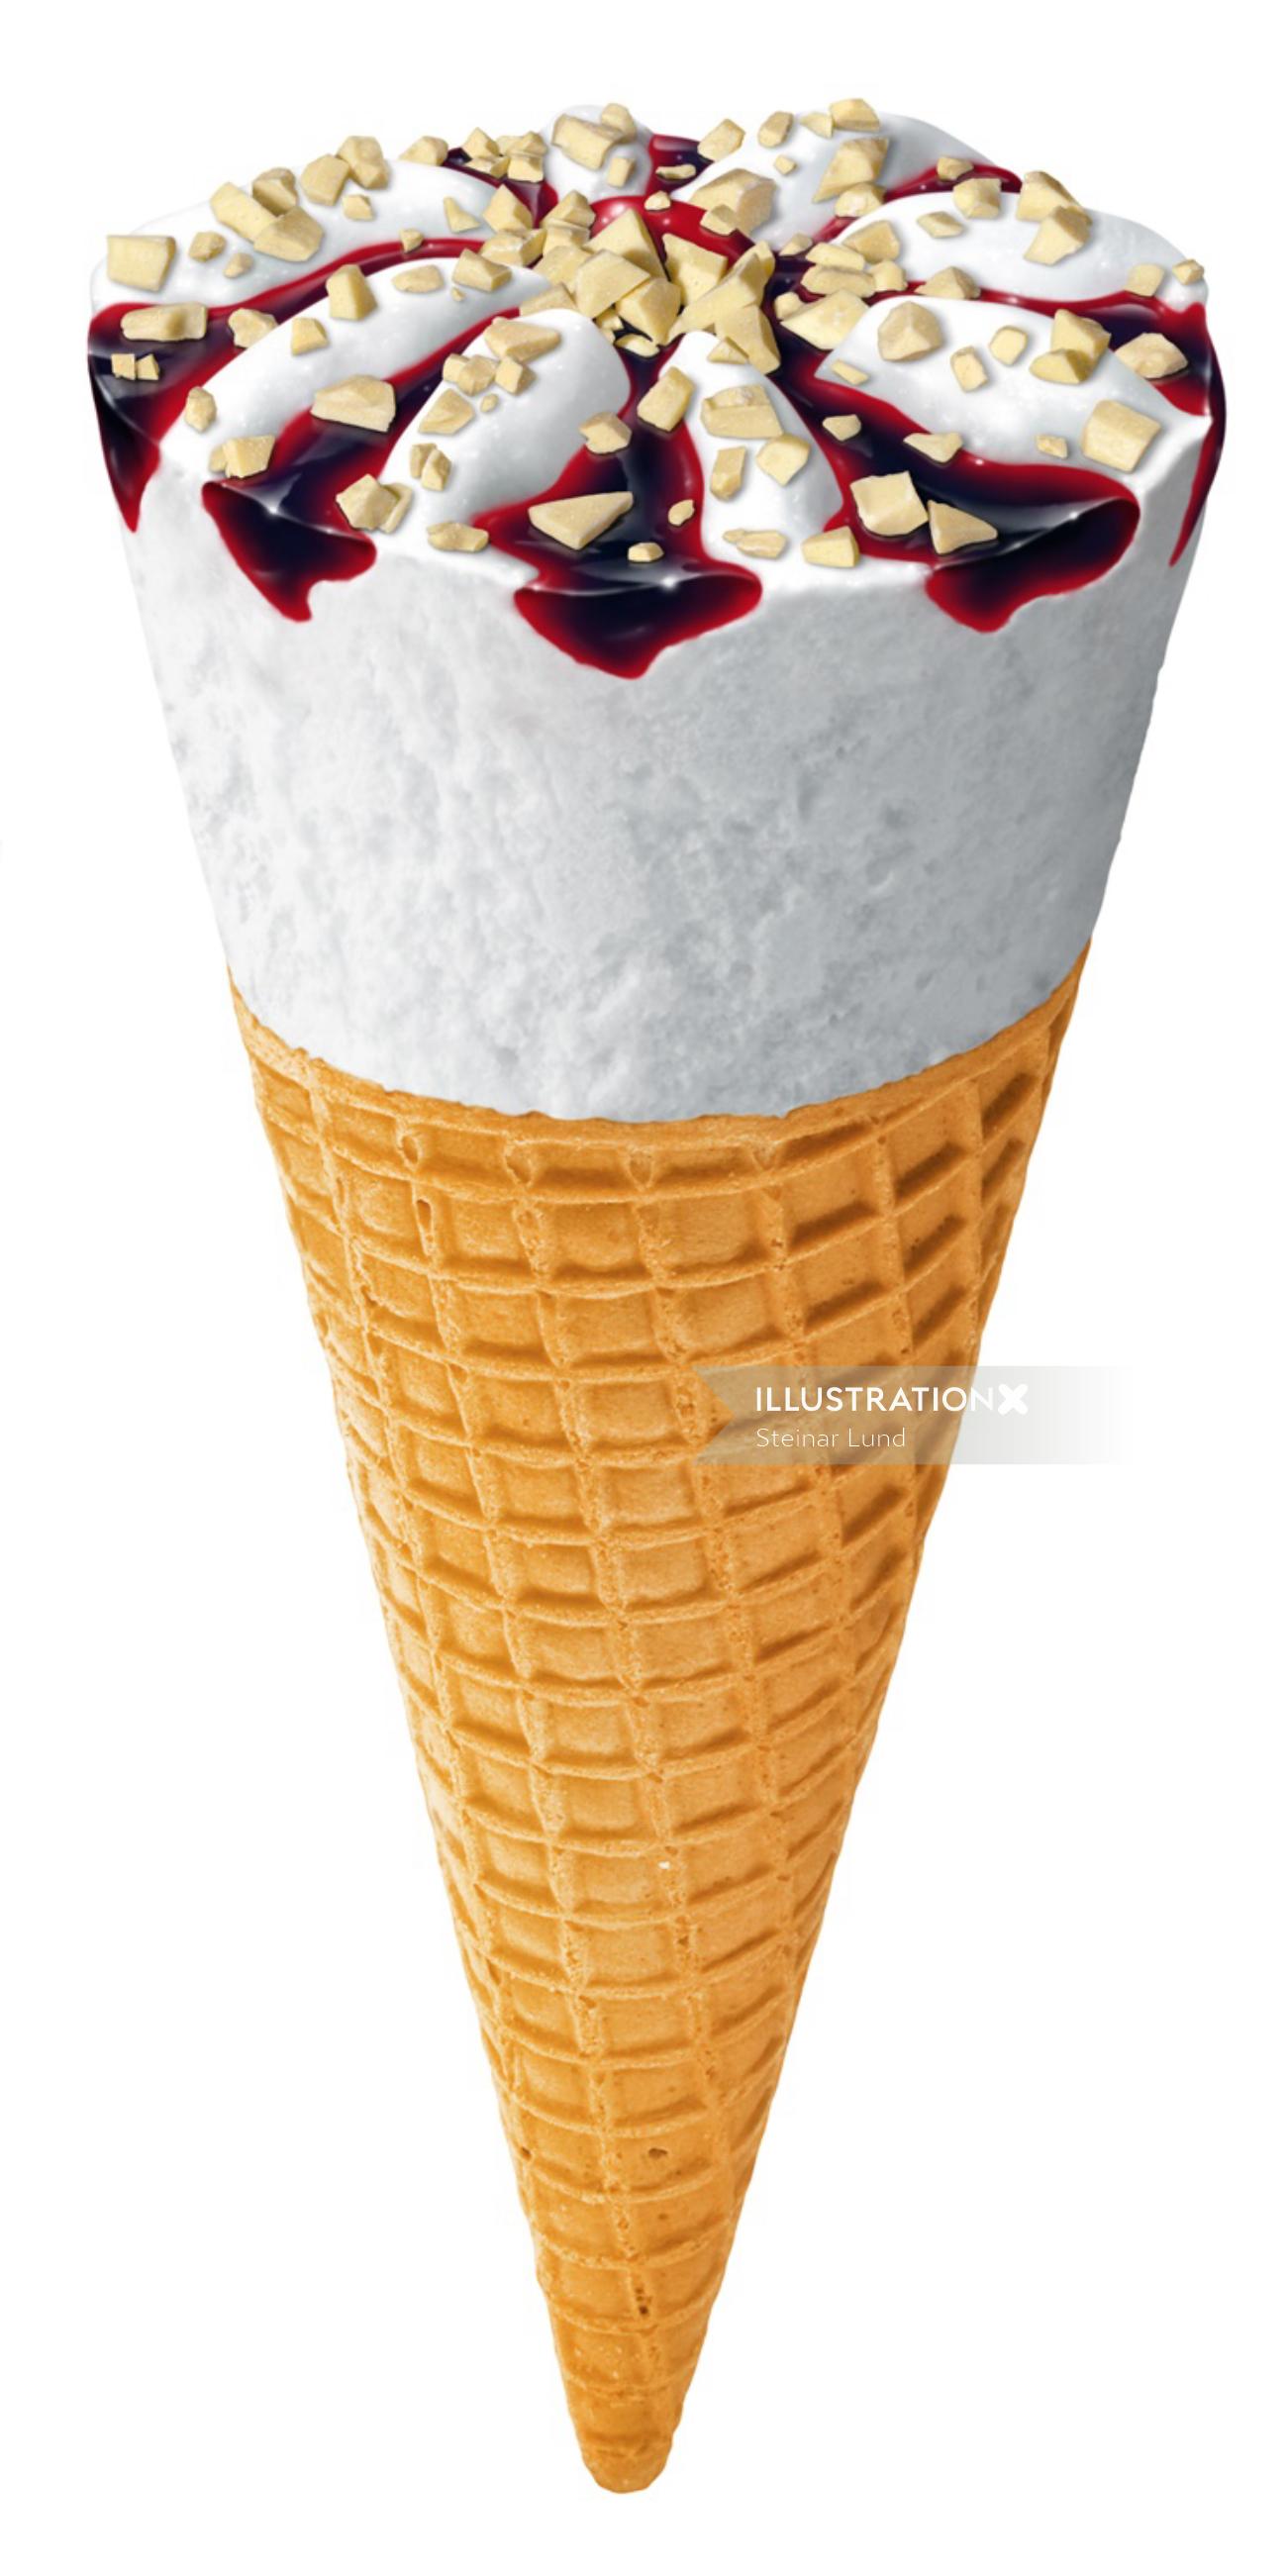 Ice cream cone with fruit sauce and white chocolate toppings